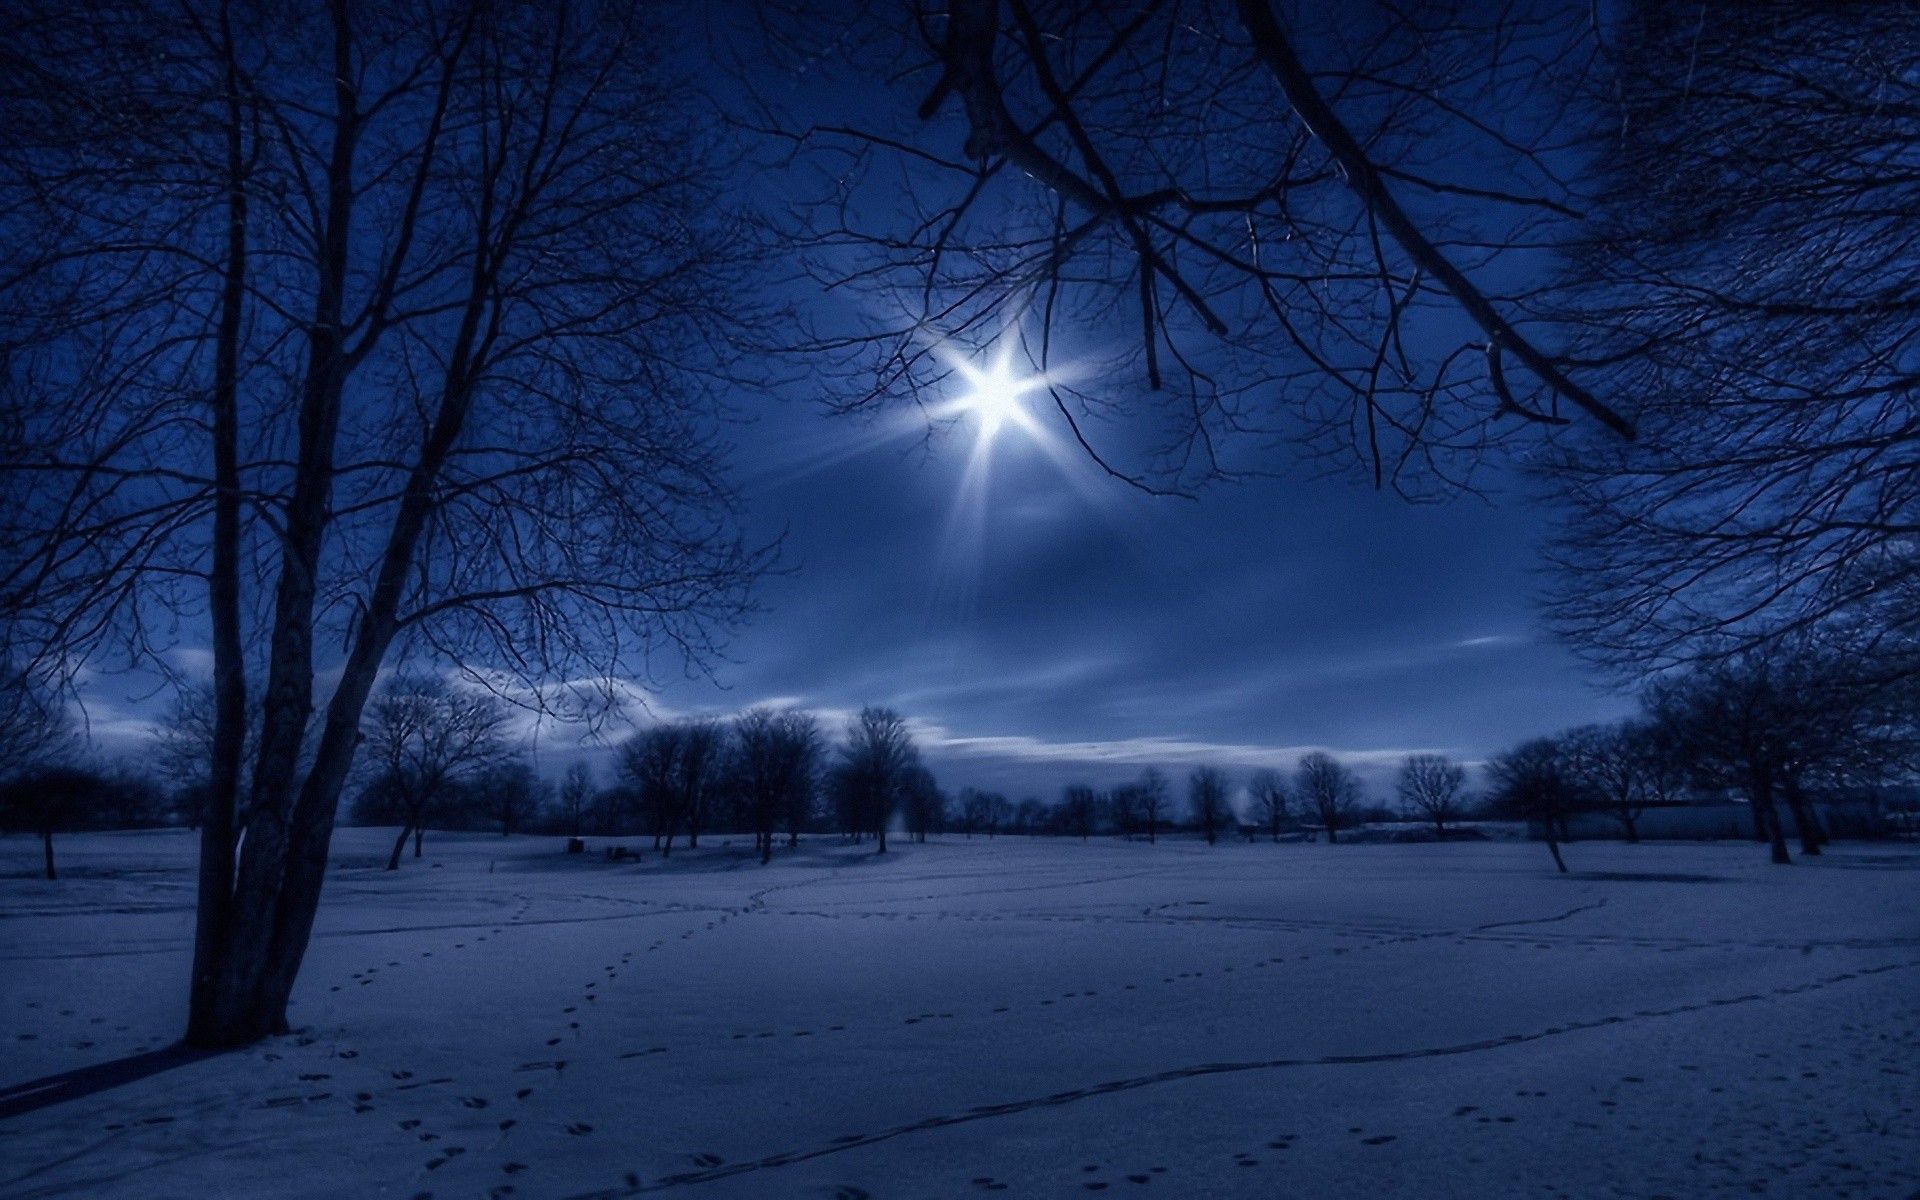 Winter Night Hd Wallpaper, Winter Night Images, New Backgrounds